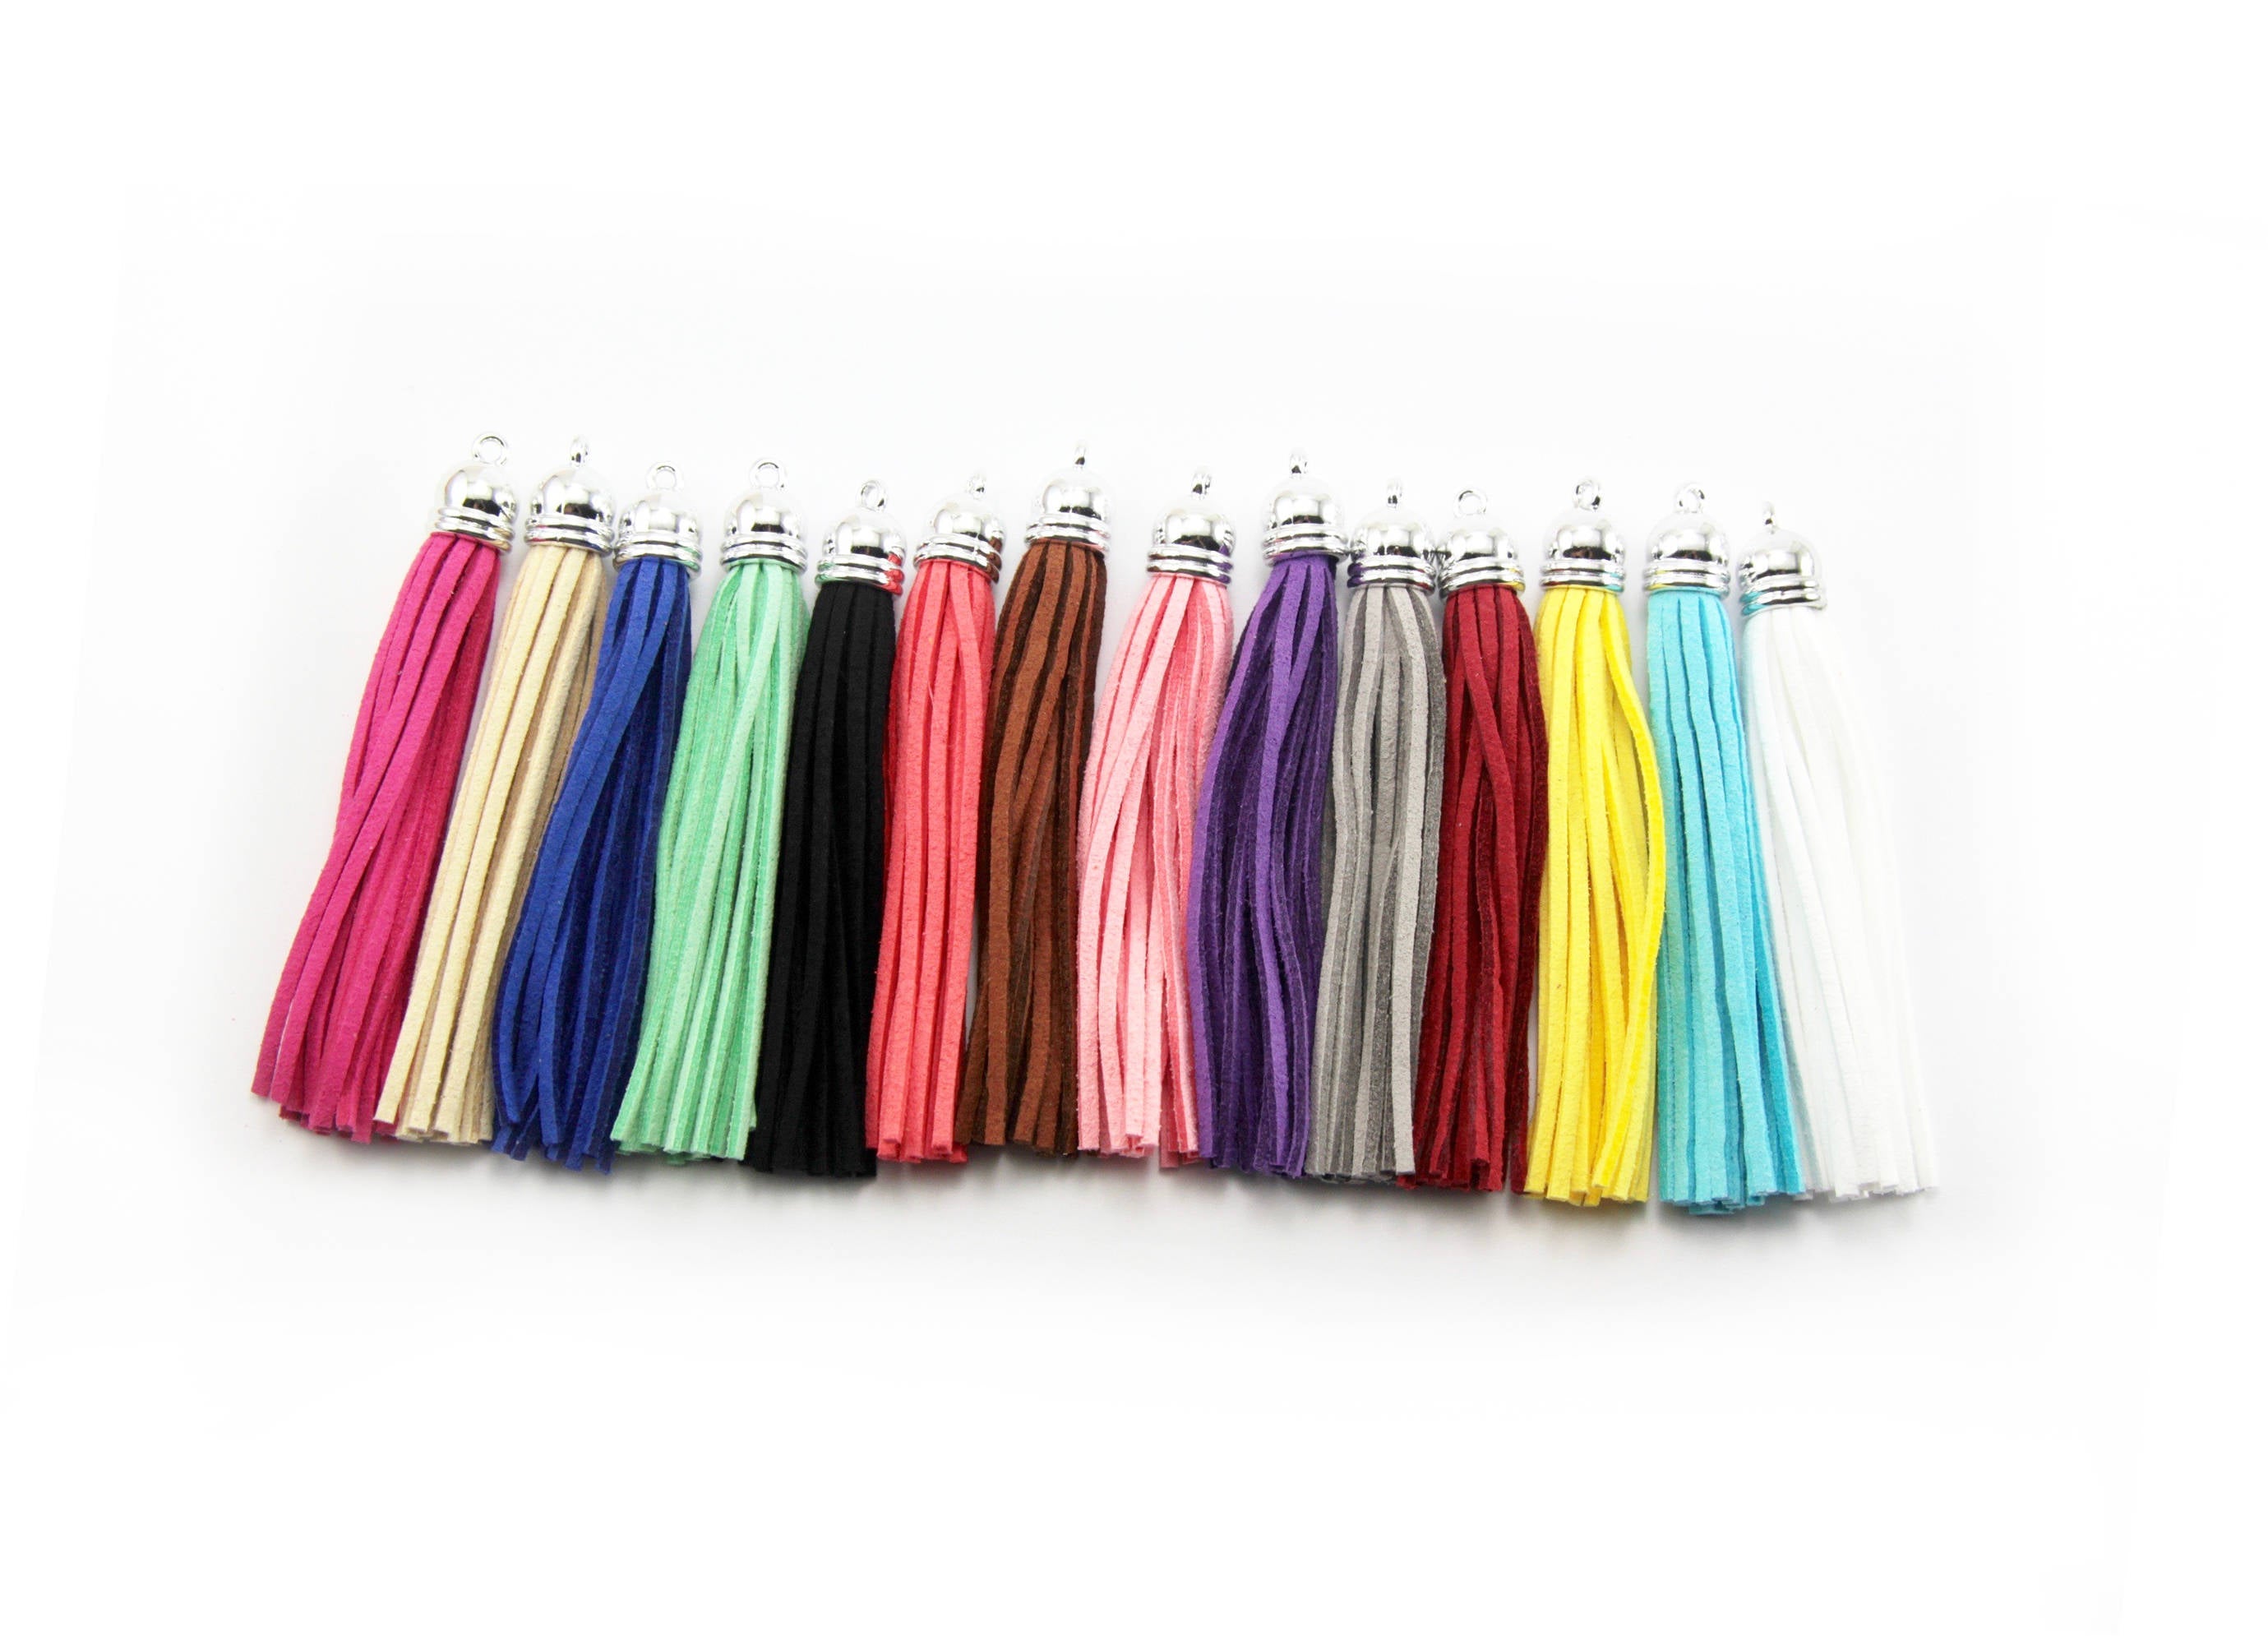 2pc 85mm Suede Tassels /tassel In Silver Cap - Choose Your Colour